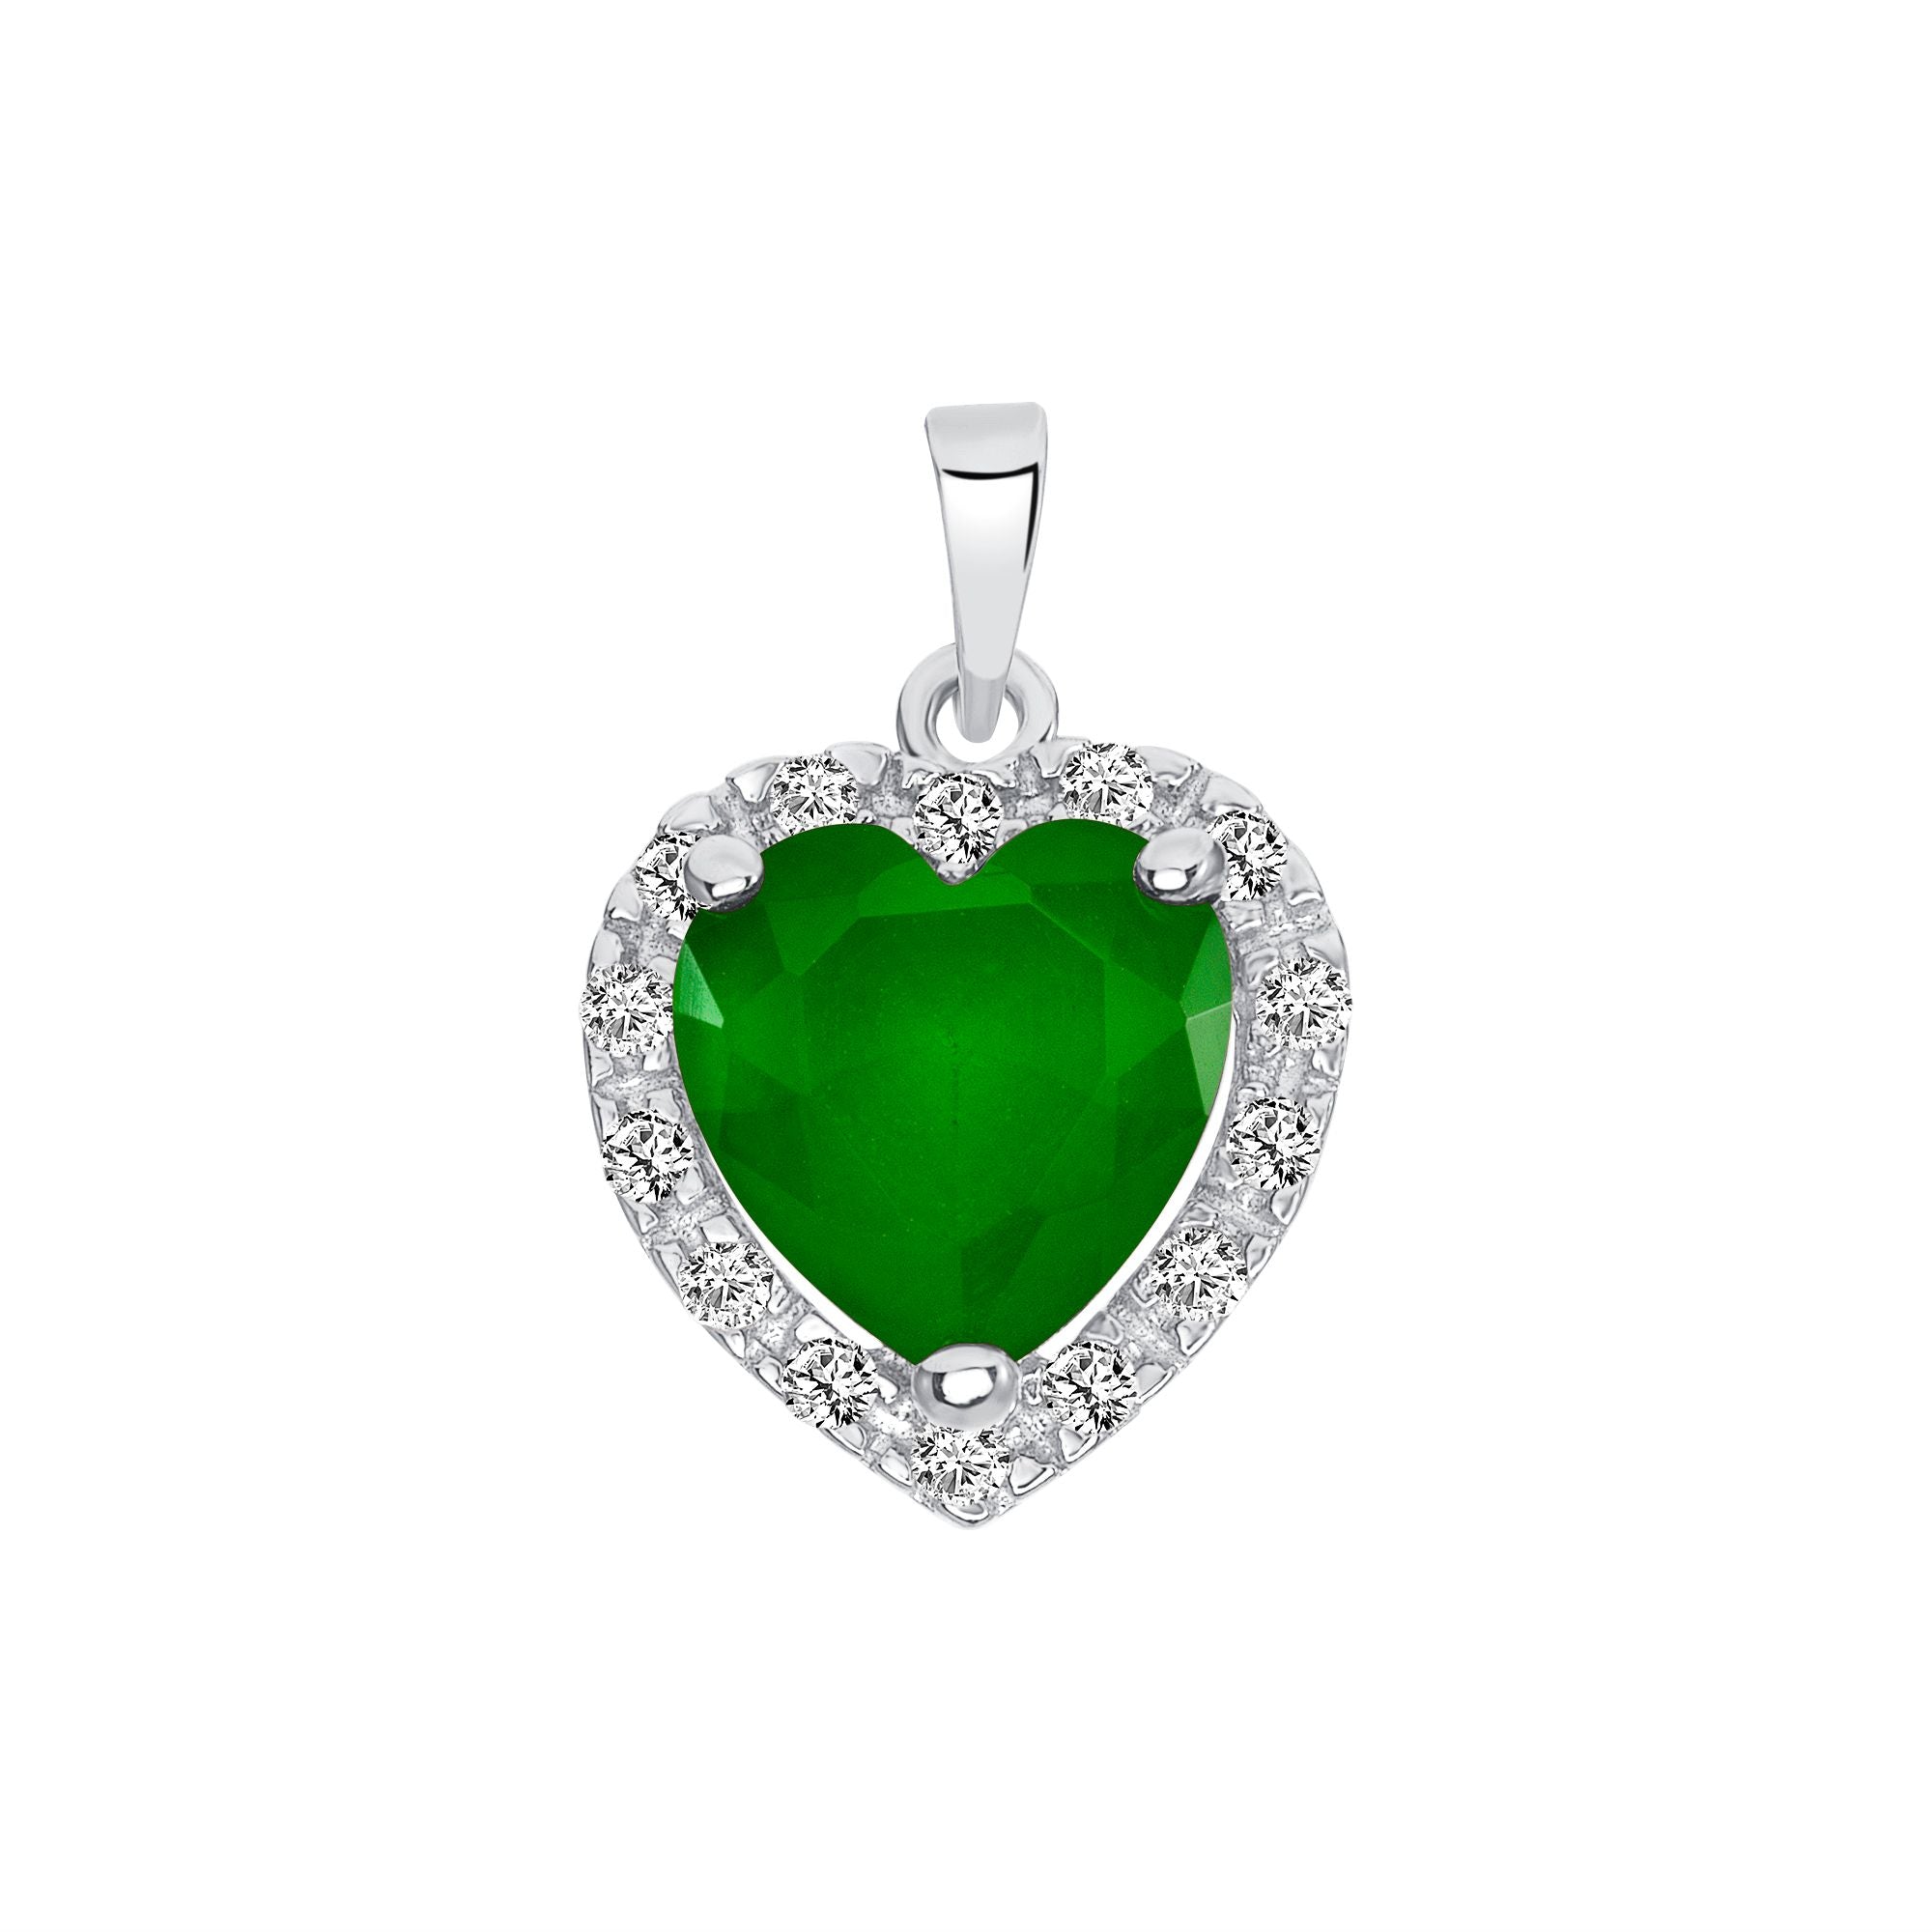 925 Sterling Silver Raised Heart Cut Green CZ with Round Cut White CZ Halo Pendant &amp; Stud Earrings Jewelry Set